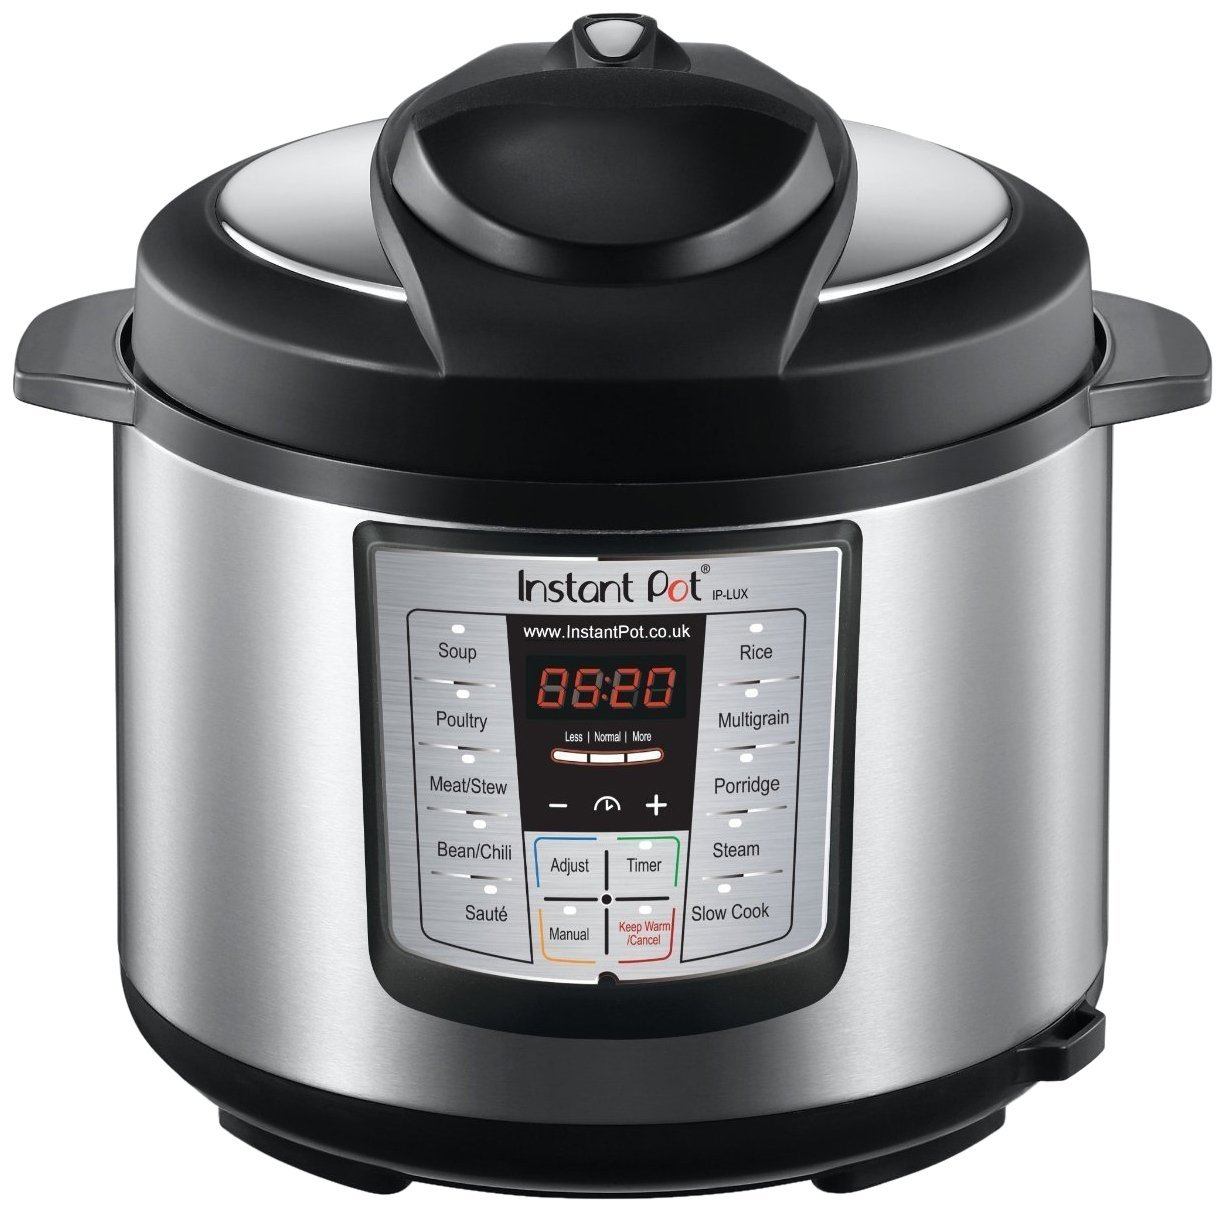 Save on Instant Pot 6 in 1 Programmable Pressure Cooker – Just $69.99! Today only!